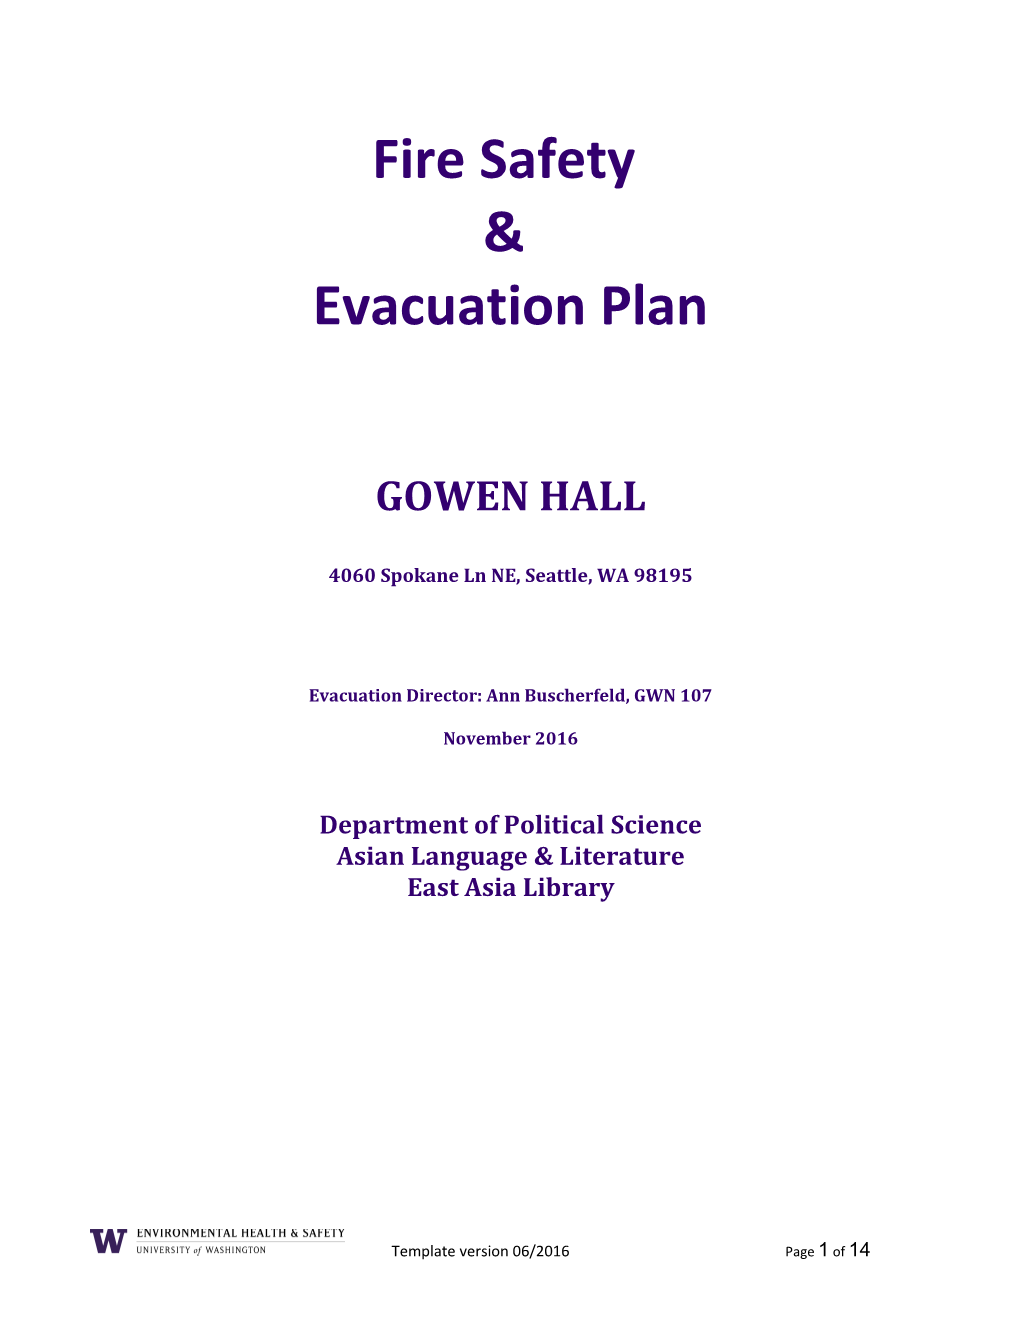 Emergency Evacuation and Operations Plan